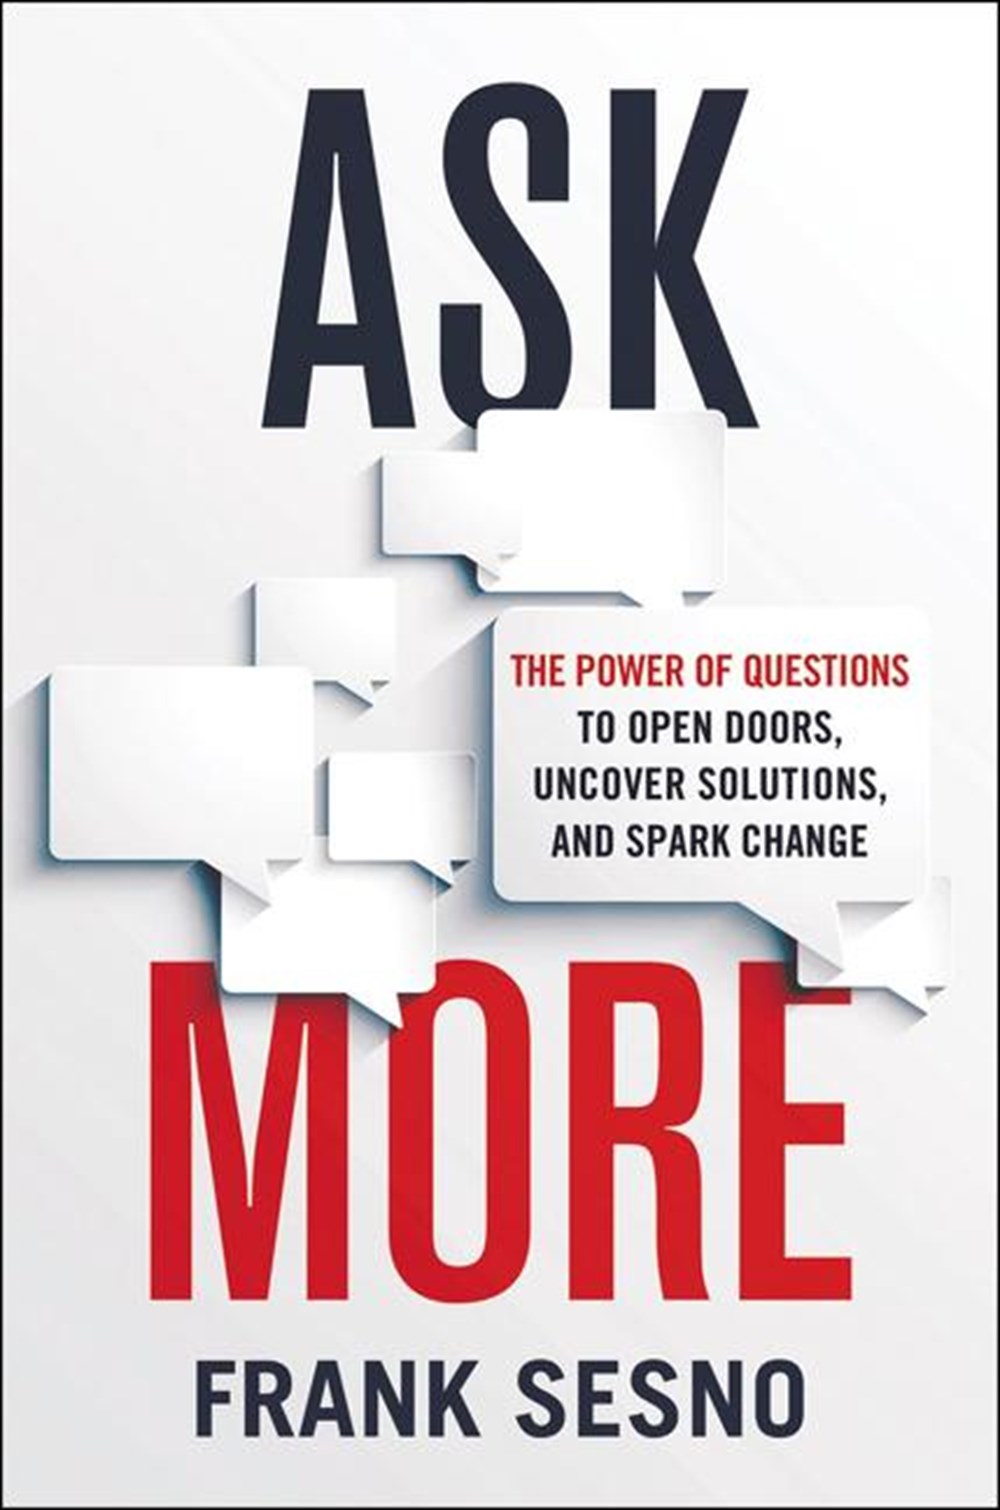 Ask More The Power of Questions to Open Doors, Uncover Solutions, and Spark Change